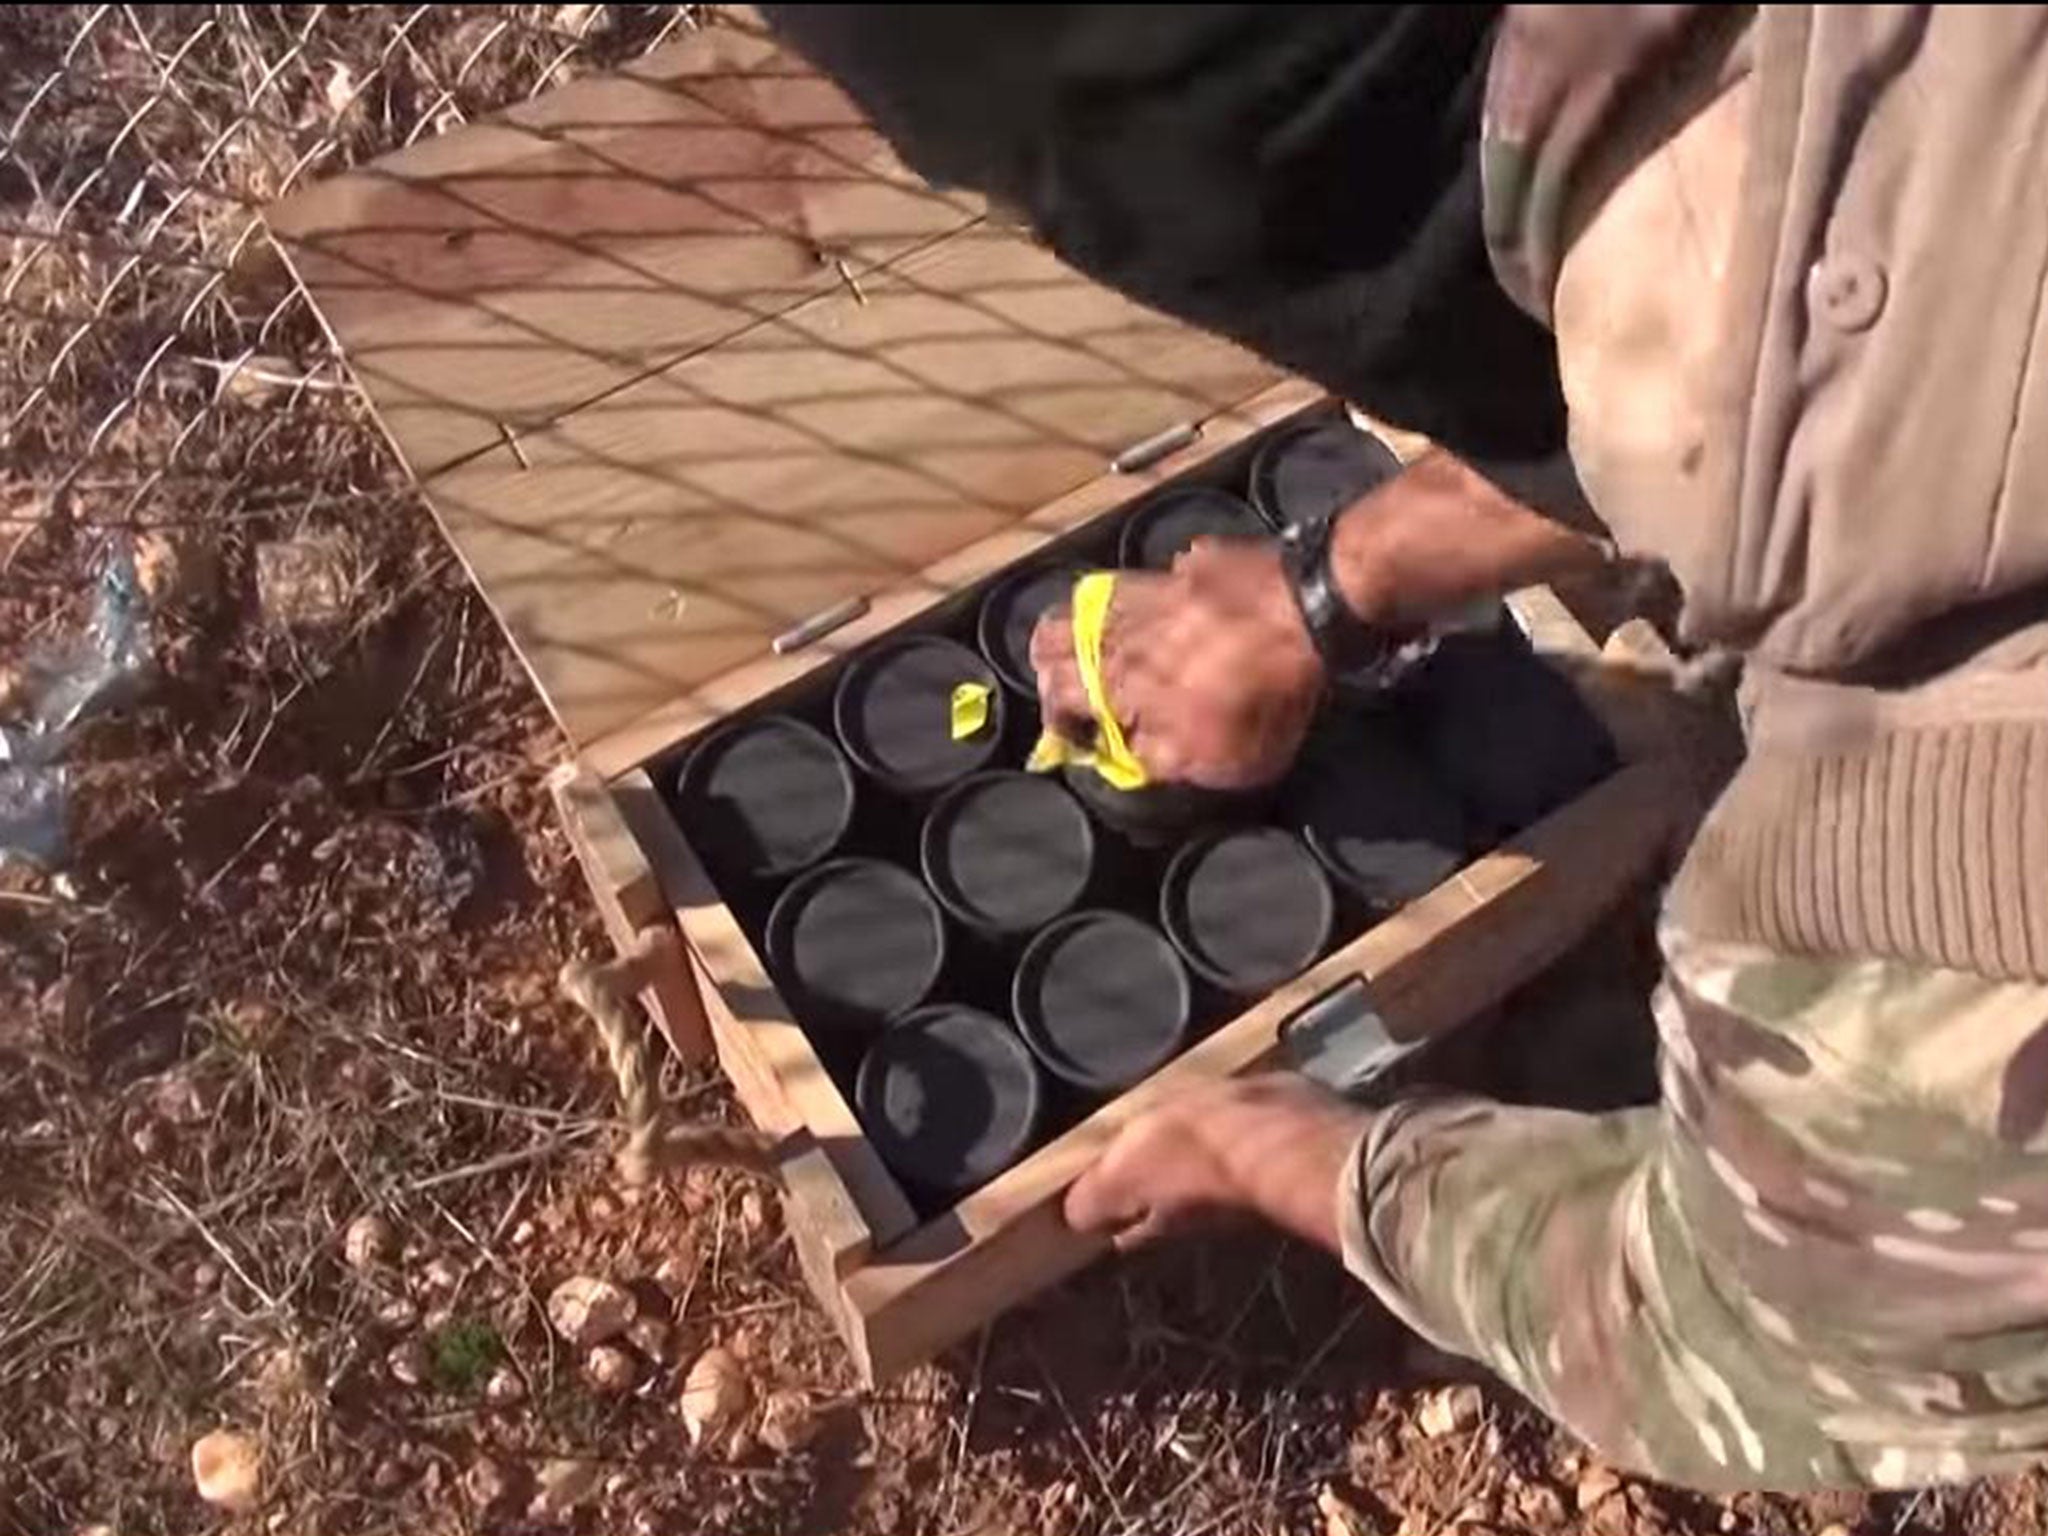 Isis fighters going through boxes they claim were dropped by the US